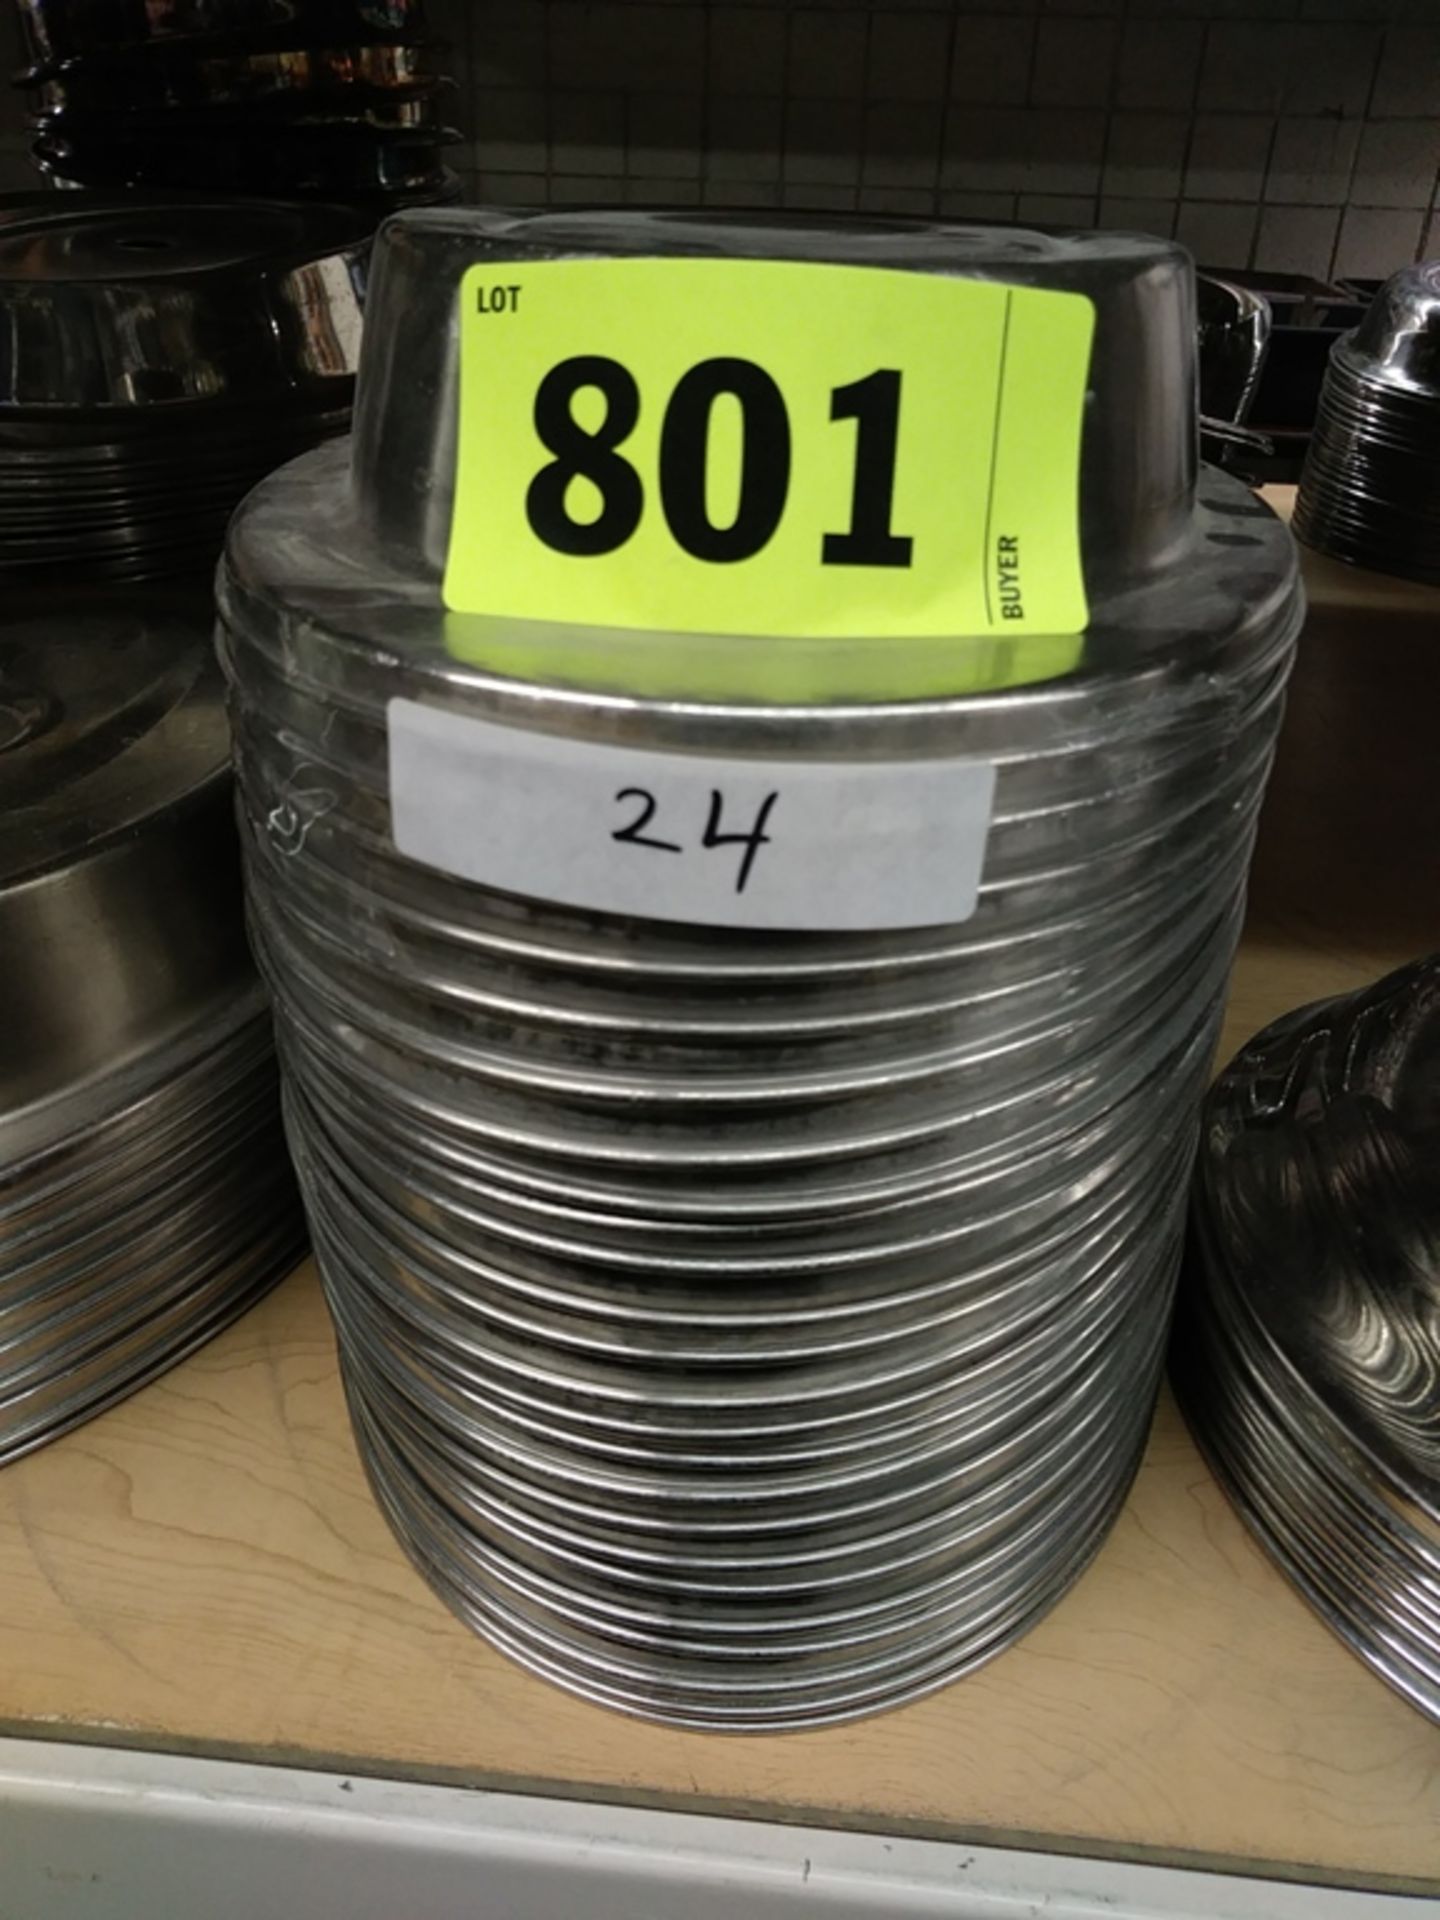 9.5" X 14" OVAL STAINLESS STEEL PLATE COVERS (INCLUDES QTY: 24) - Image 4 of 4